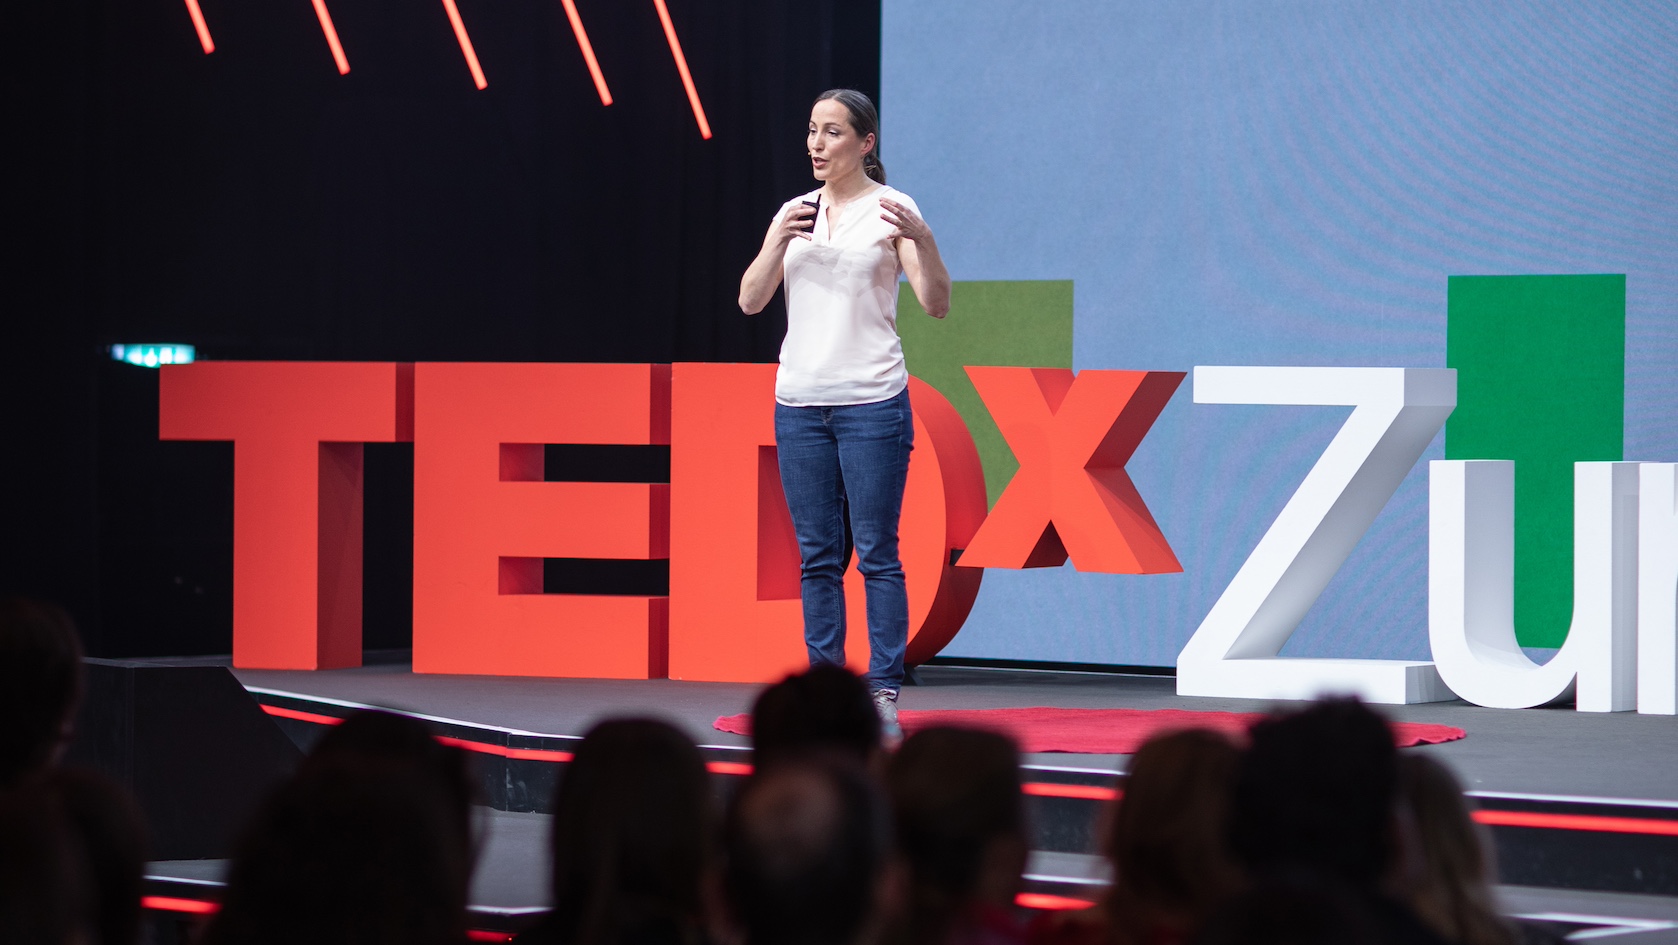 Sarah Ebling on stage of TEDxZurich 2023